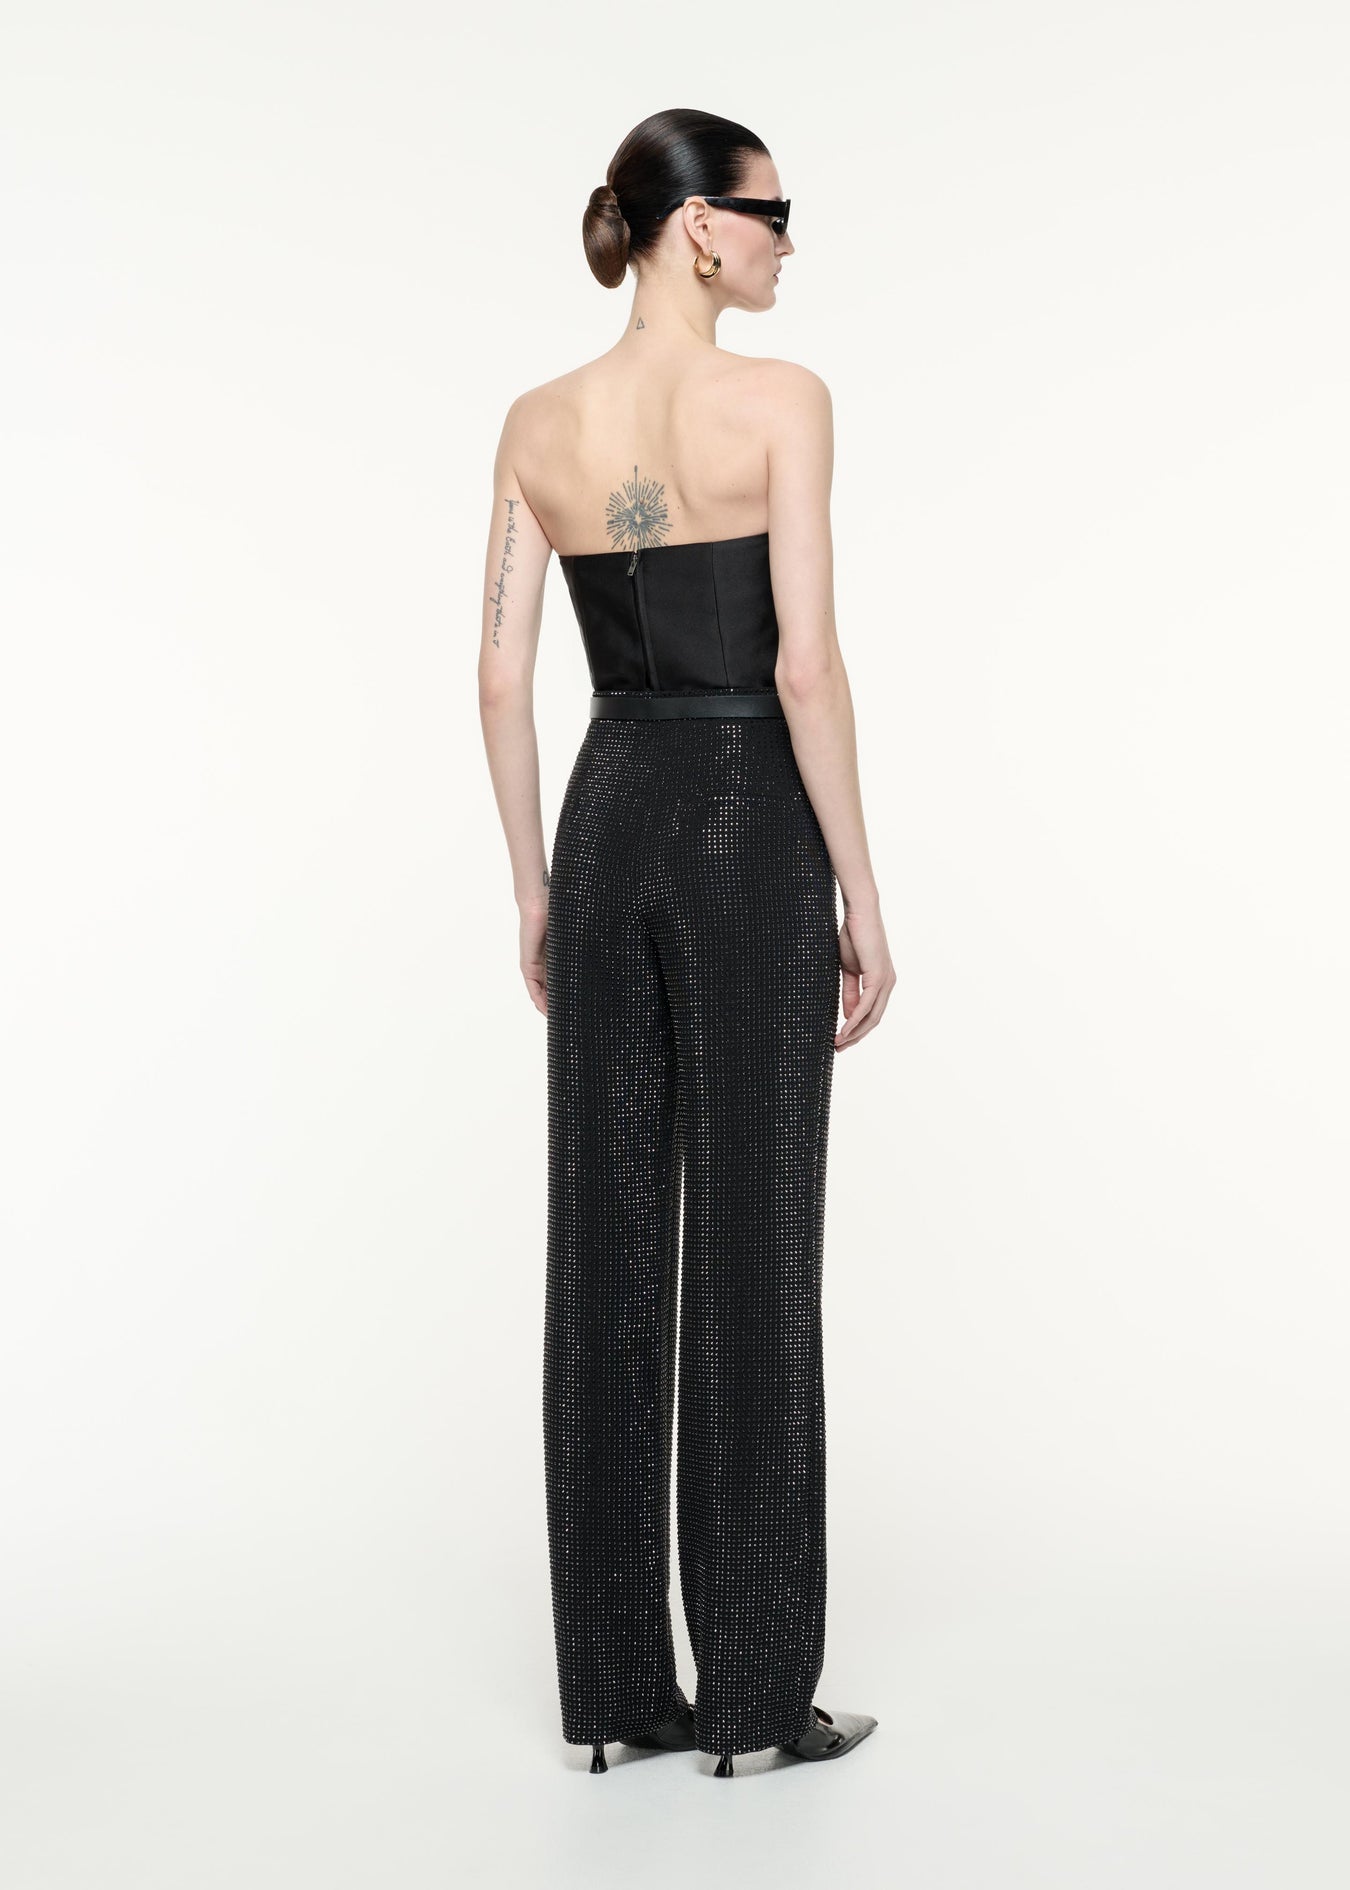 A back view image of a model wearing the Diamante Trouser in Black